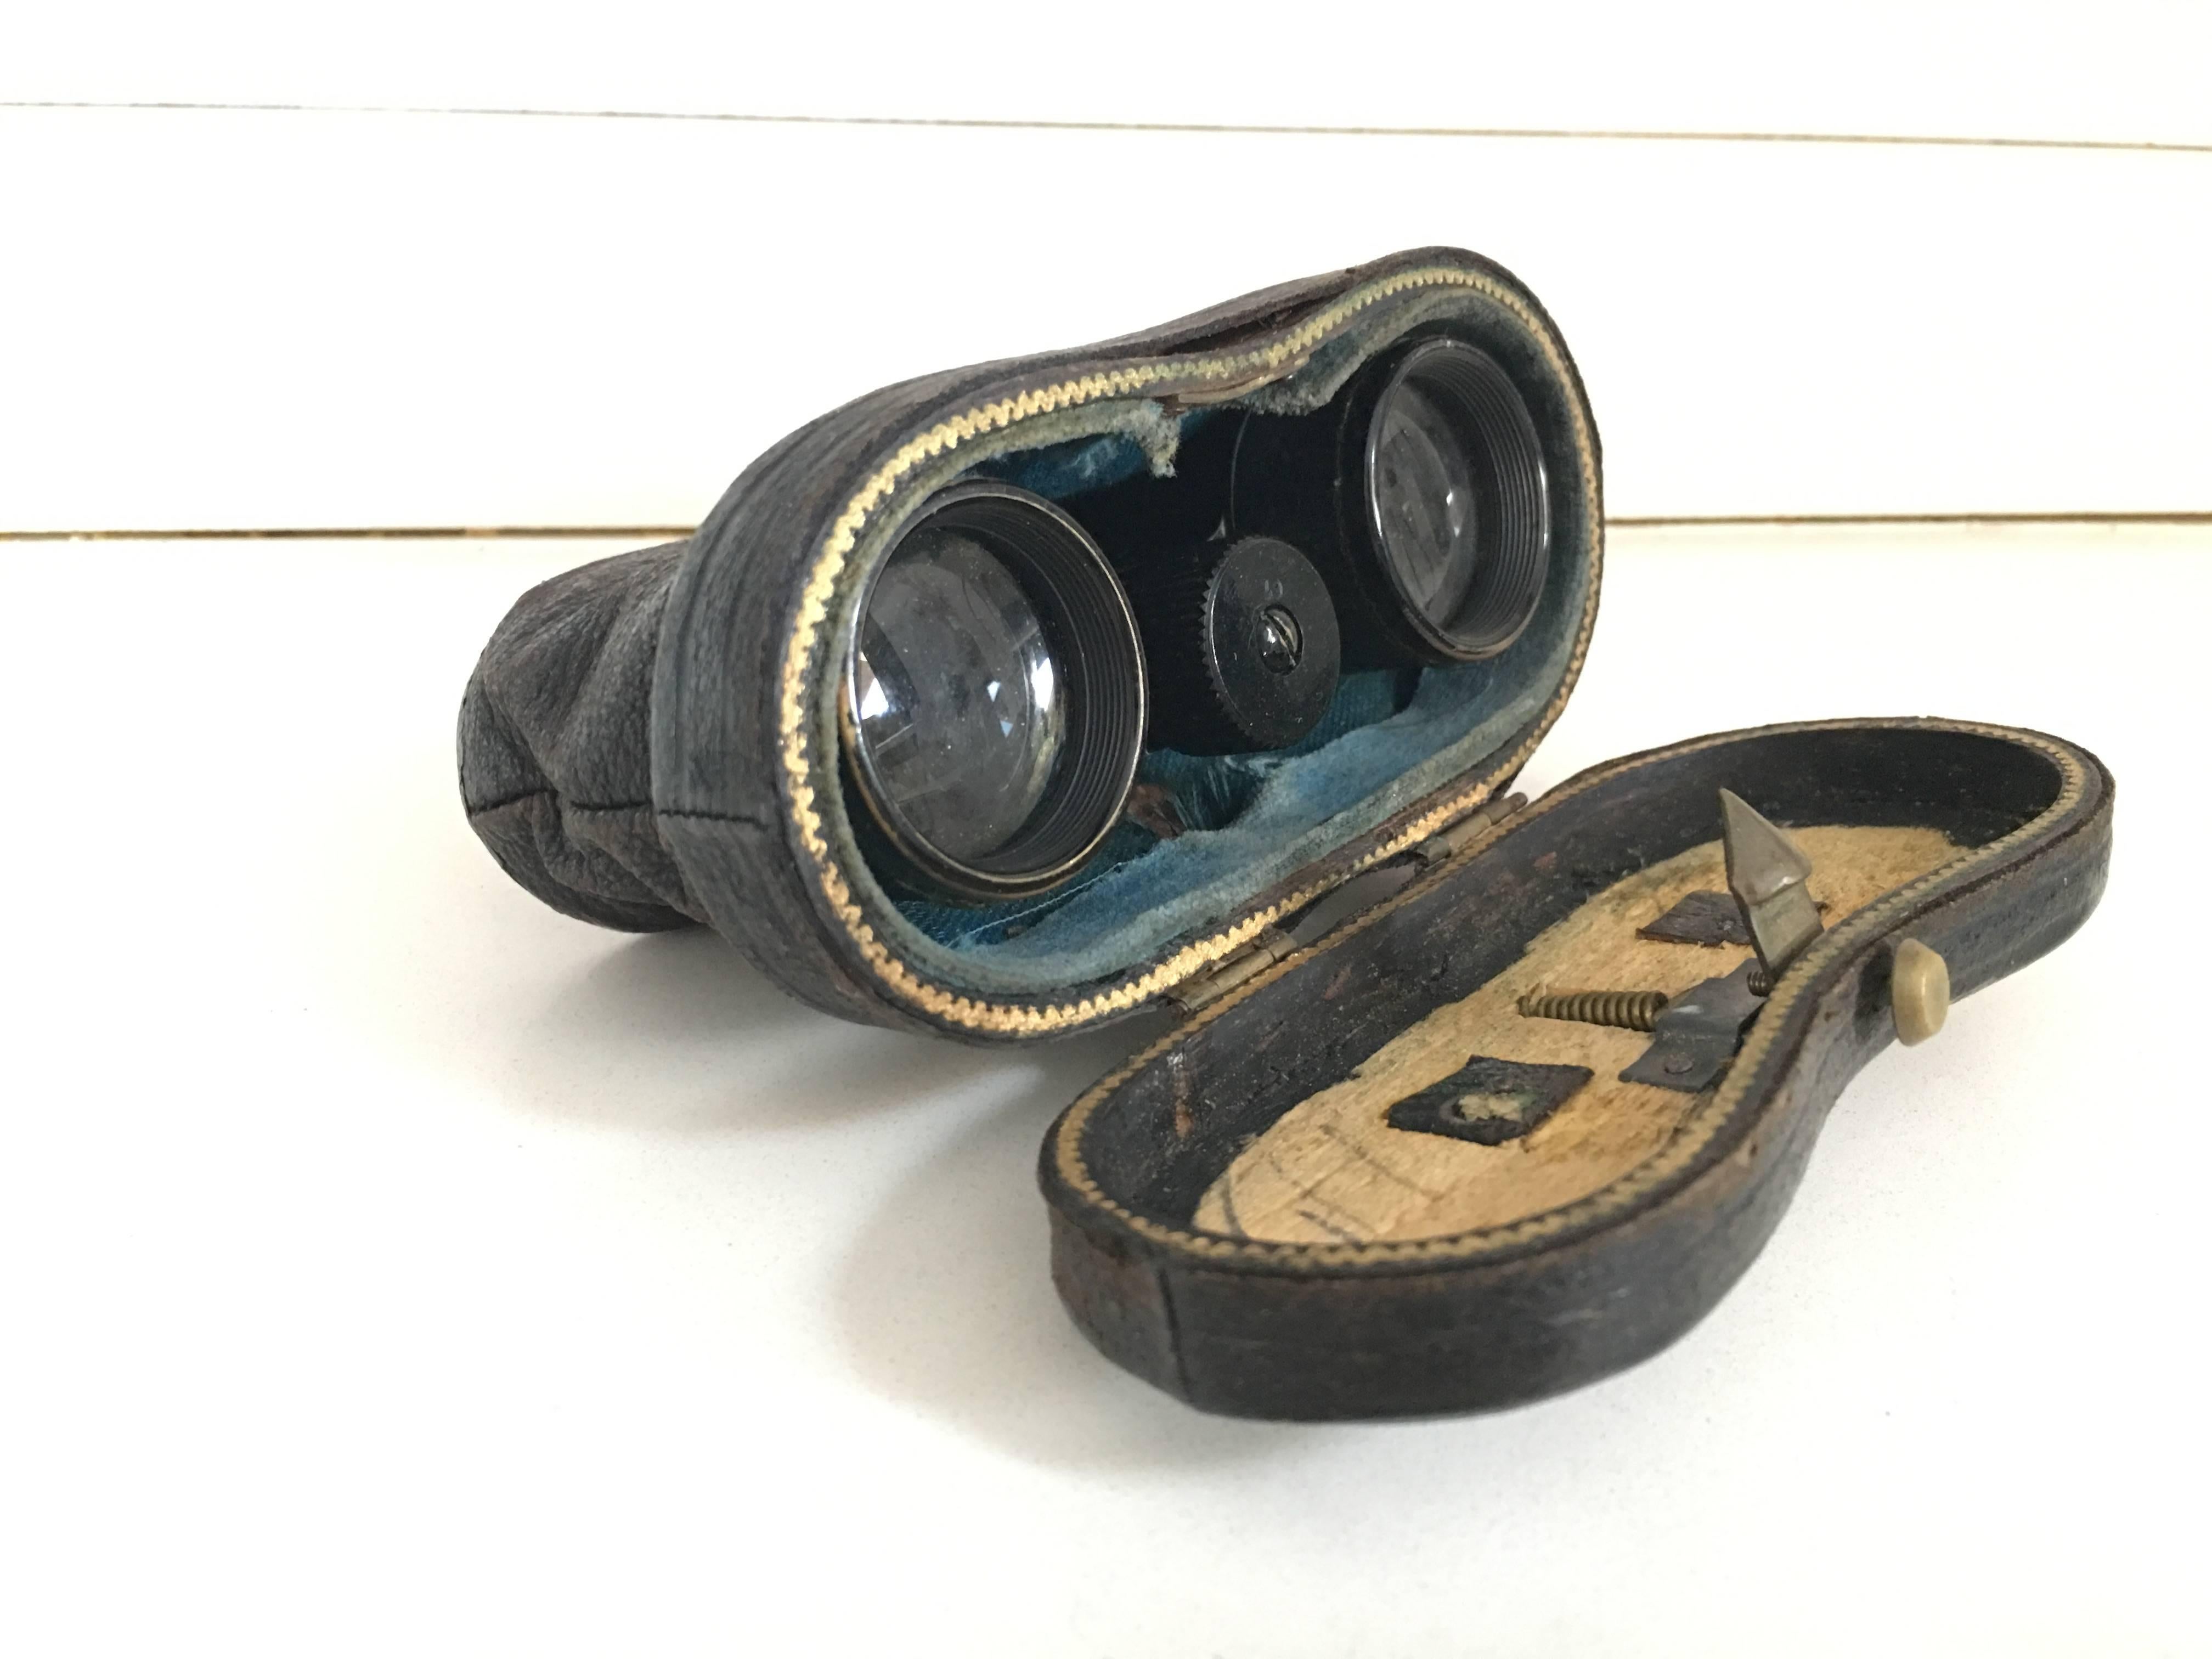 Binoculars opera glasses with leather case.